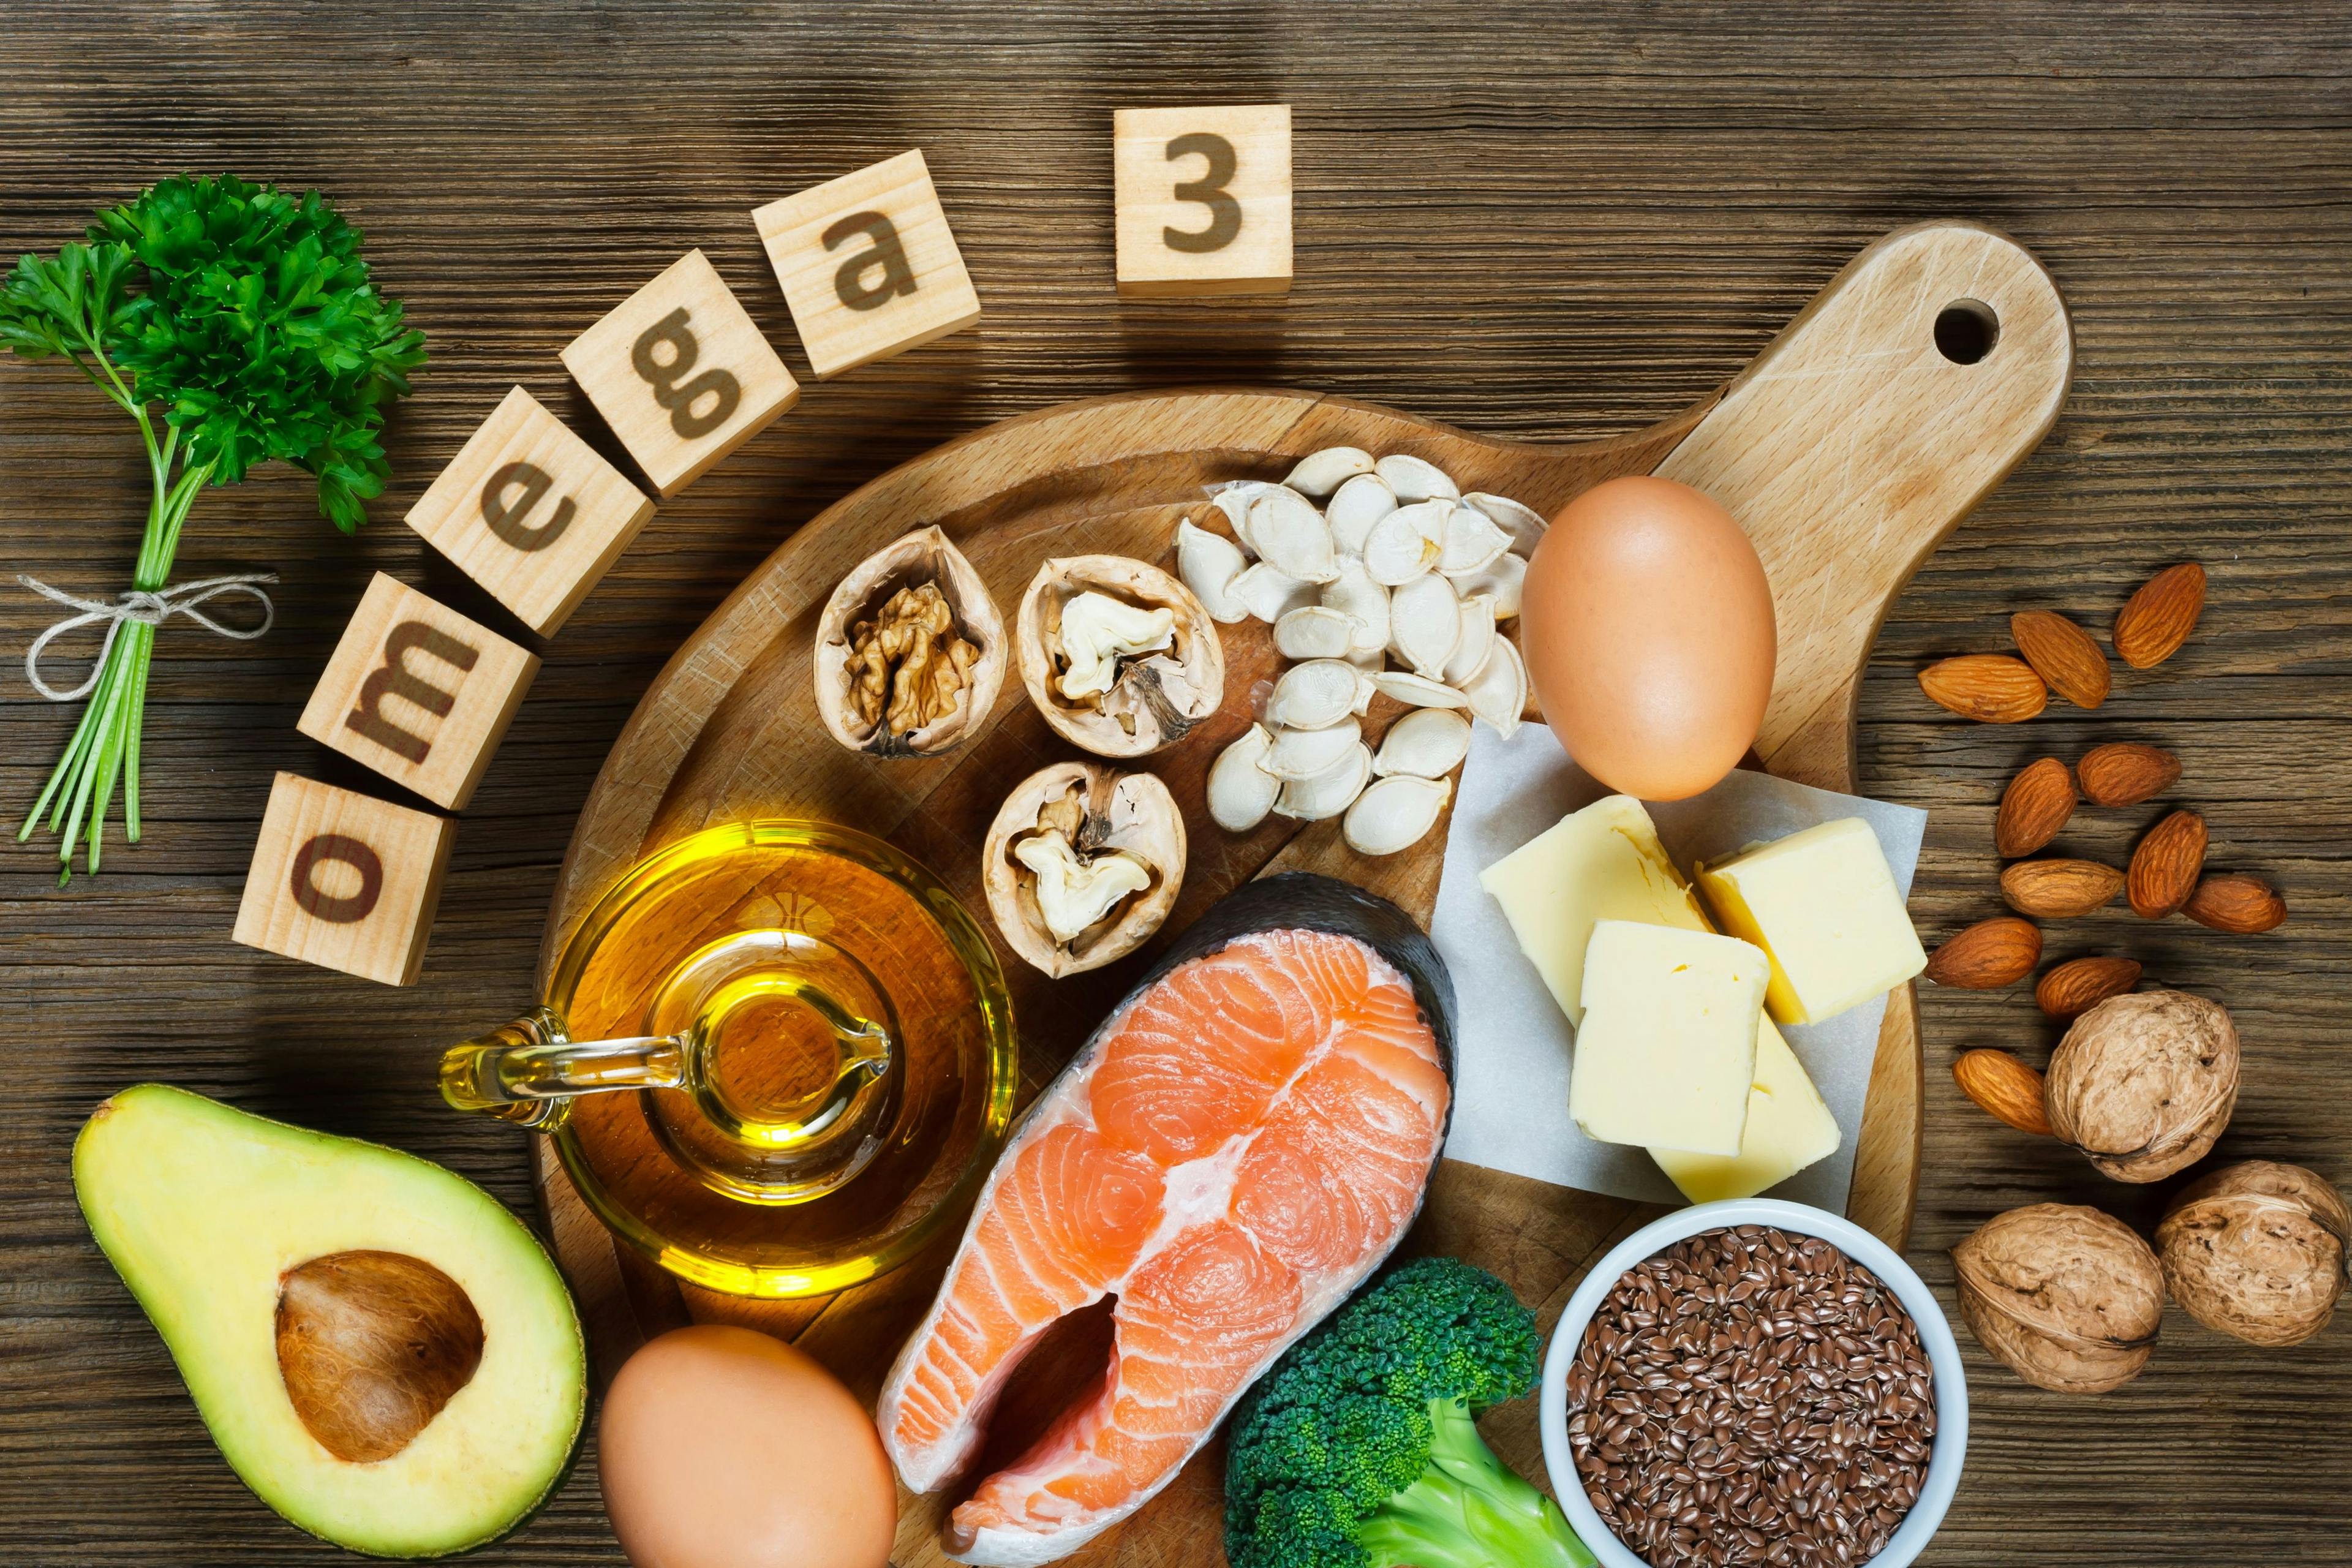 Animal and vegetable sources of omega-3 / airborne77 - stock.adobe.com